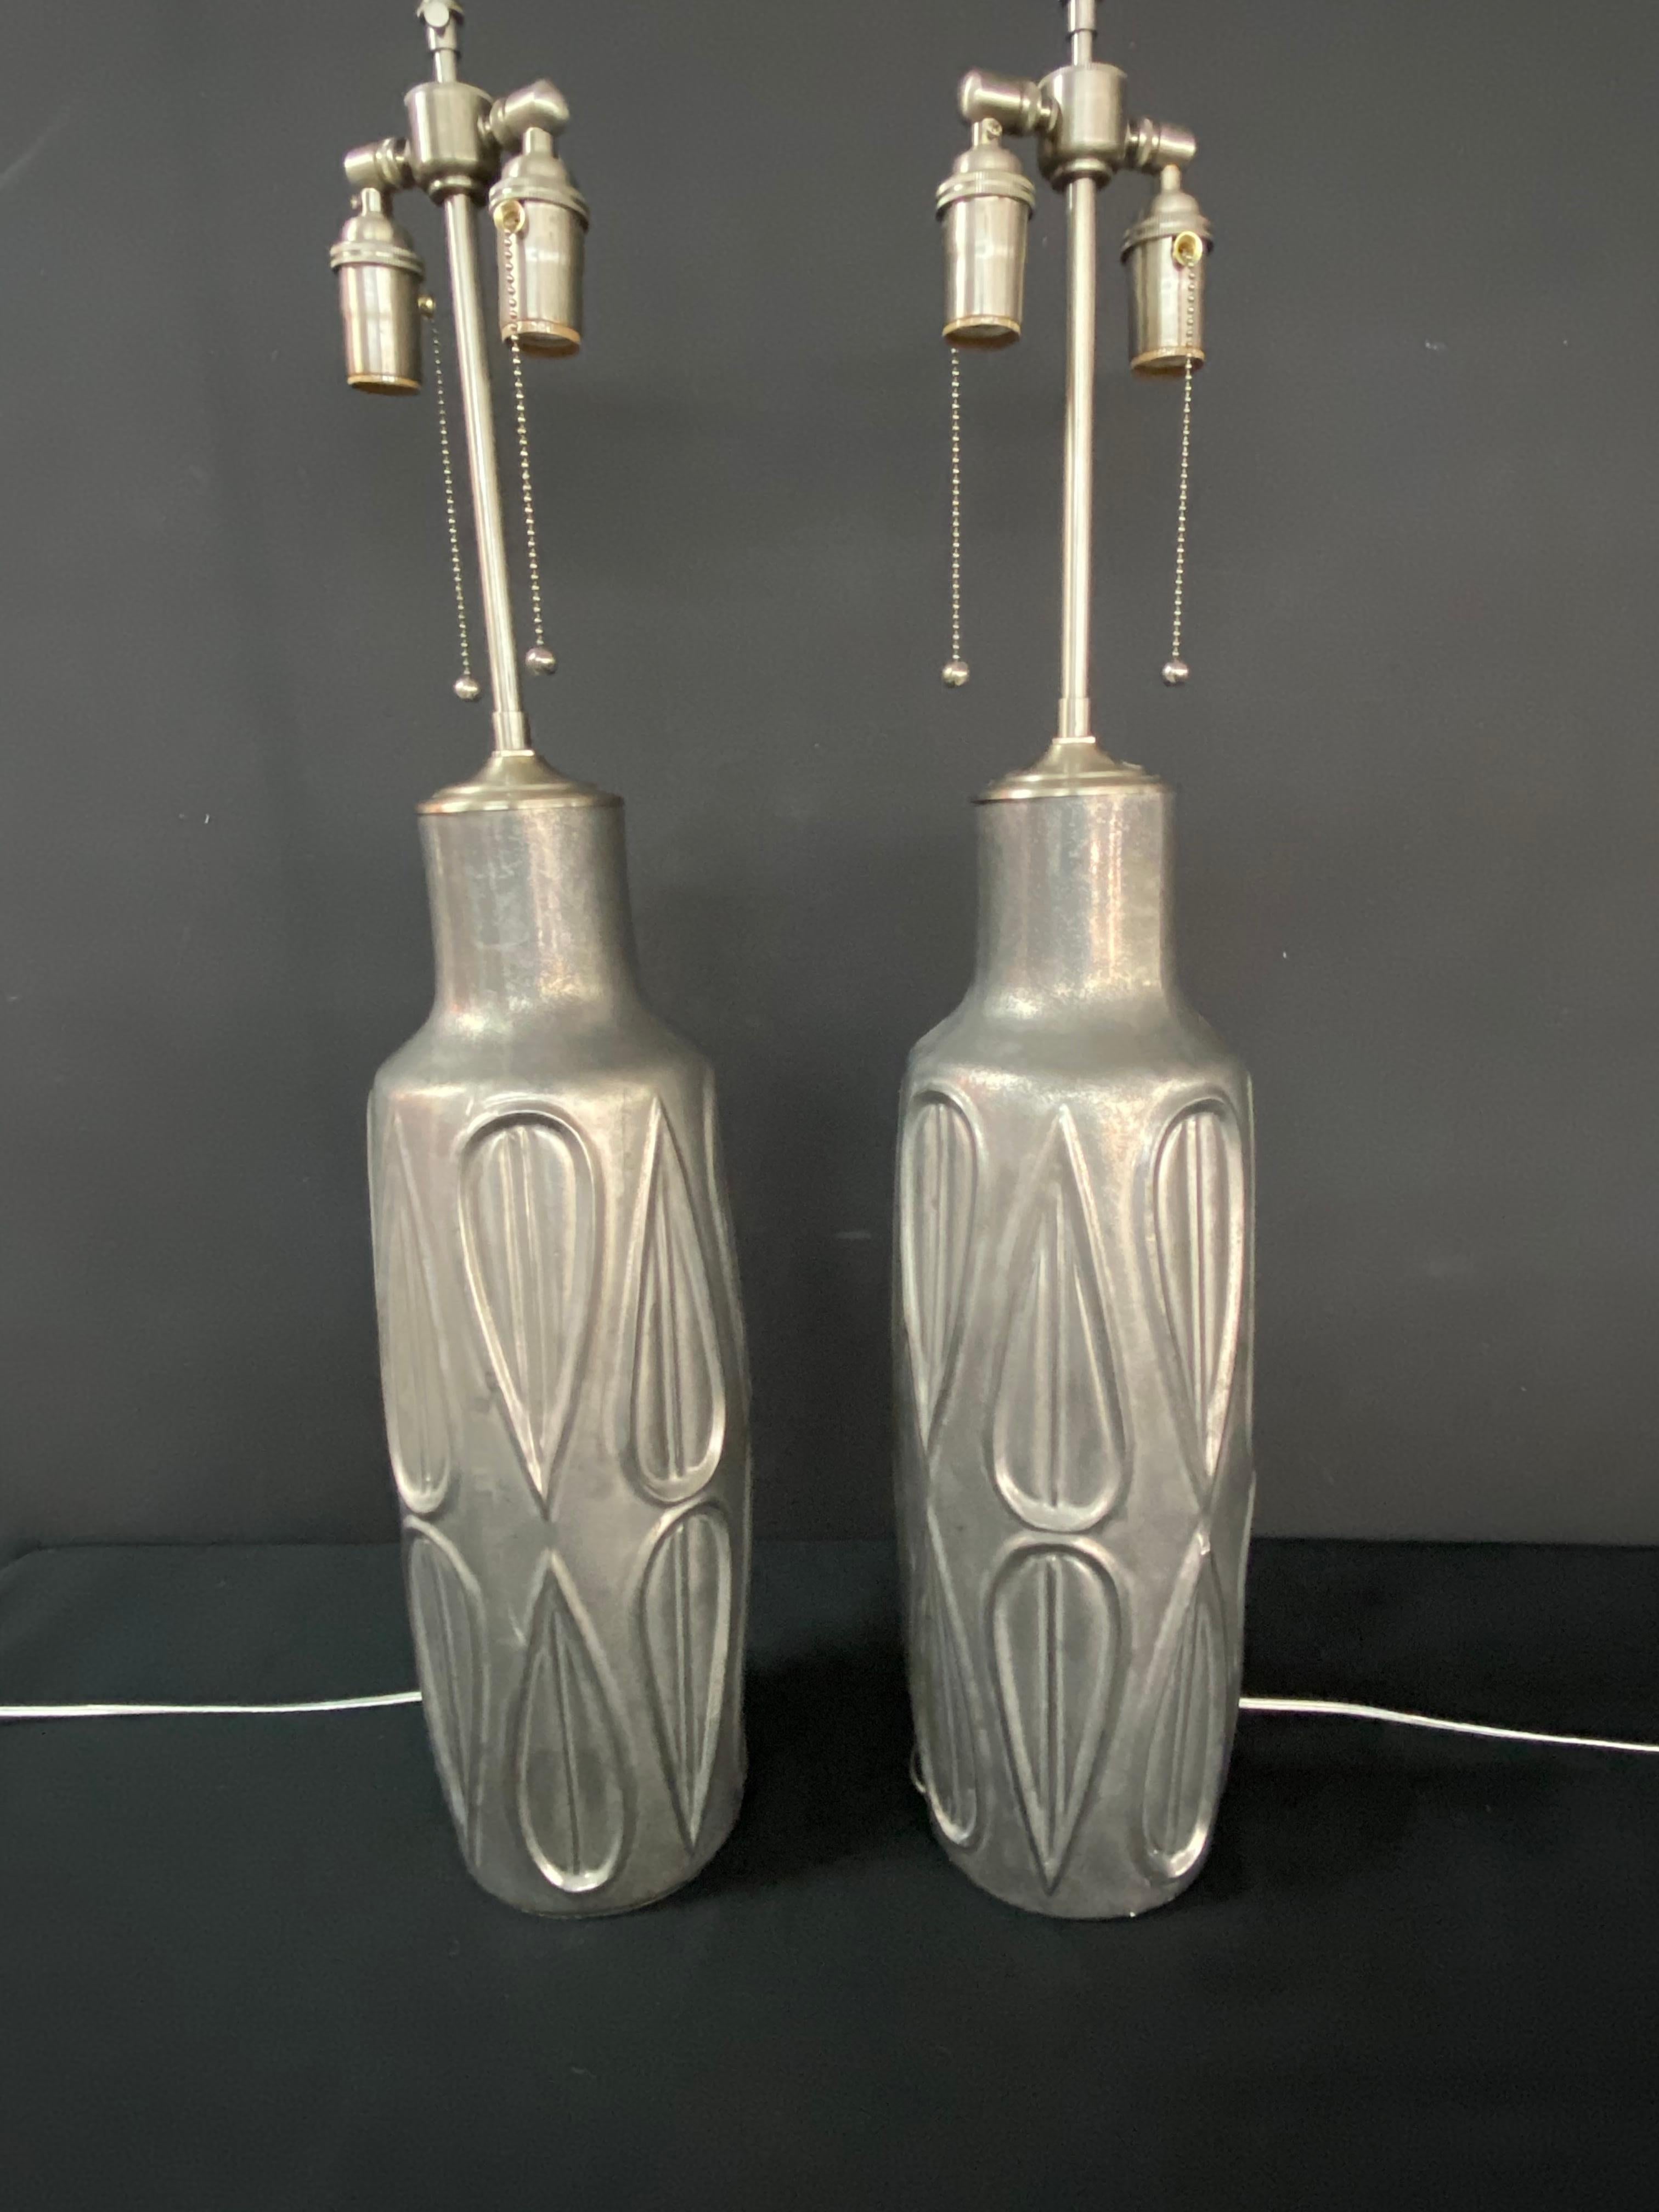 A unique pair of elegant vessels in a soft patina metal finish with lamp application. Our lamps have the unique distinction of being comprised of vases and vessels that we determine will make excellent lamps, then we convert them into lighting. As a